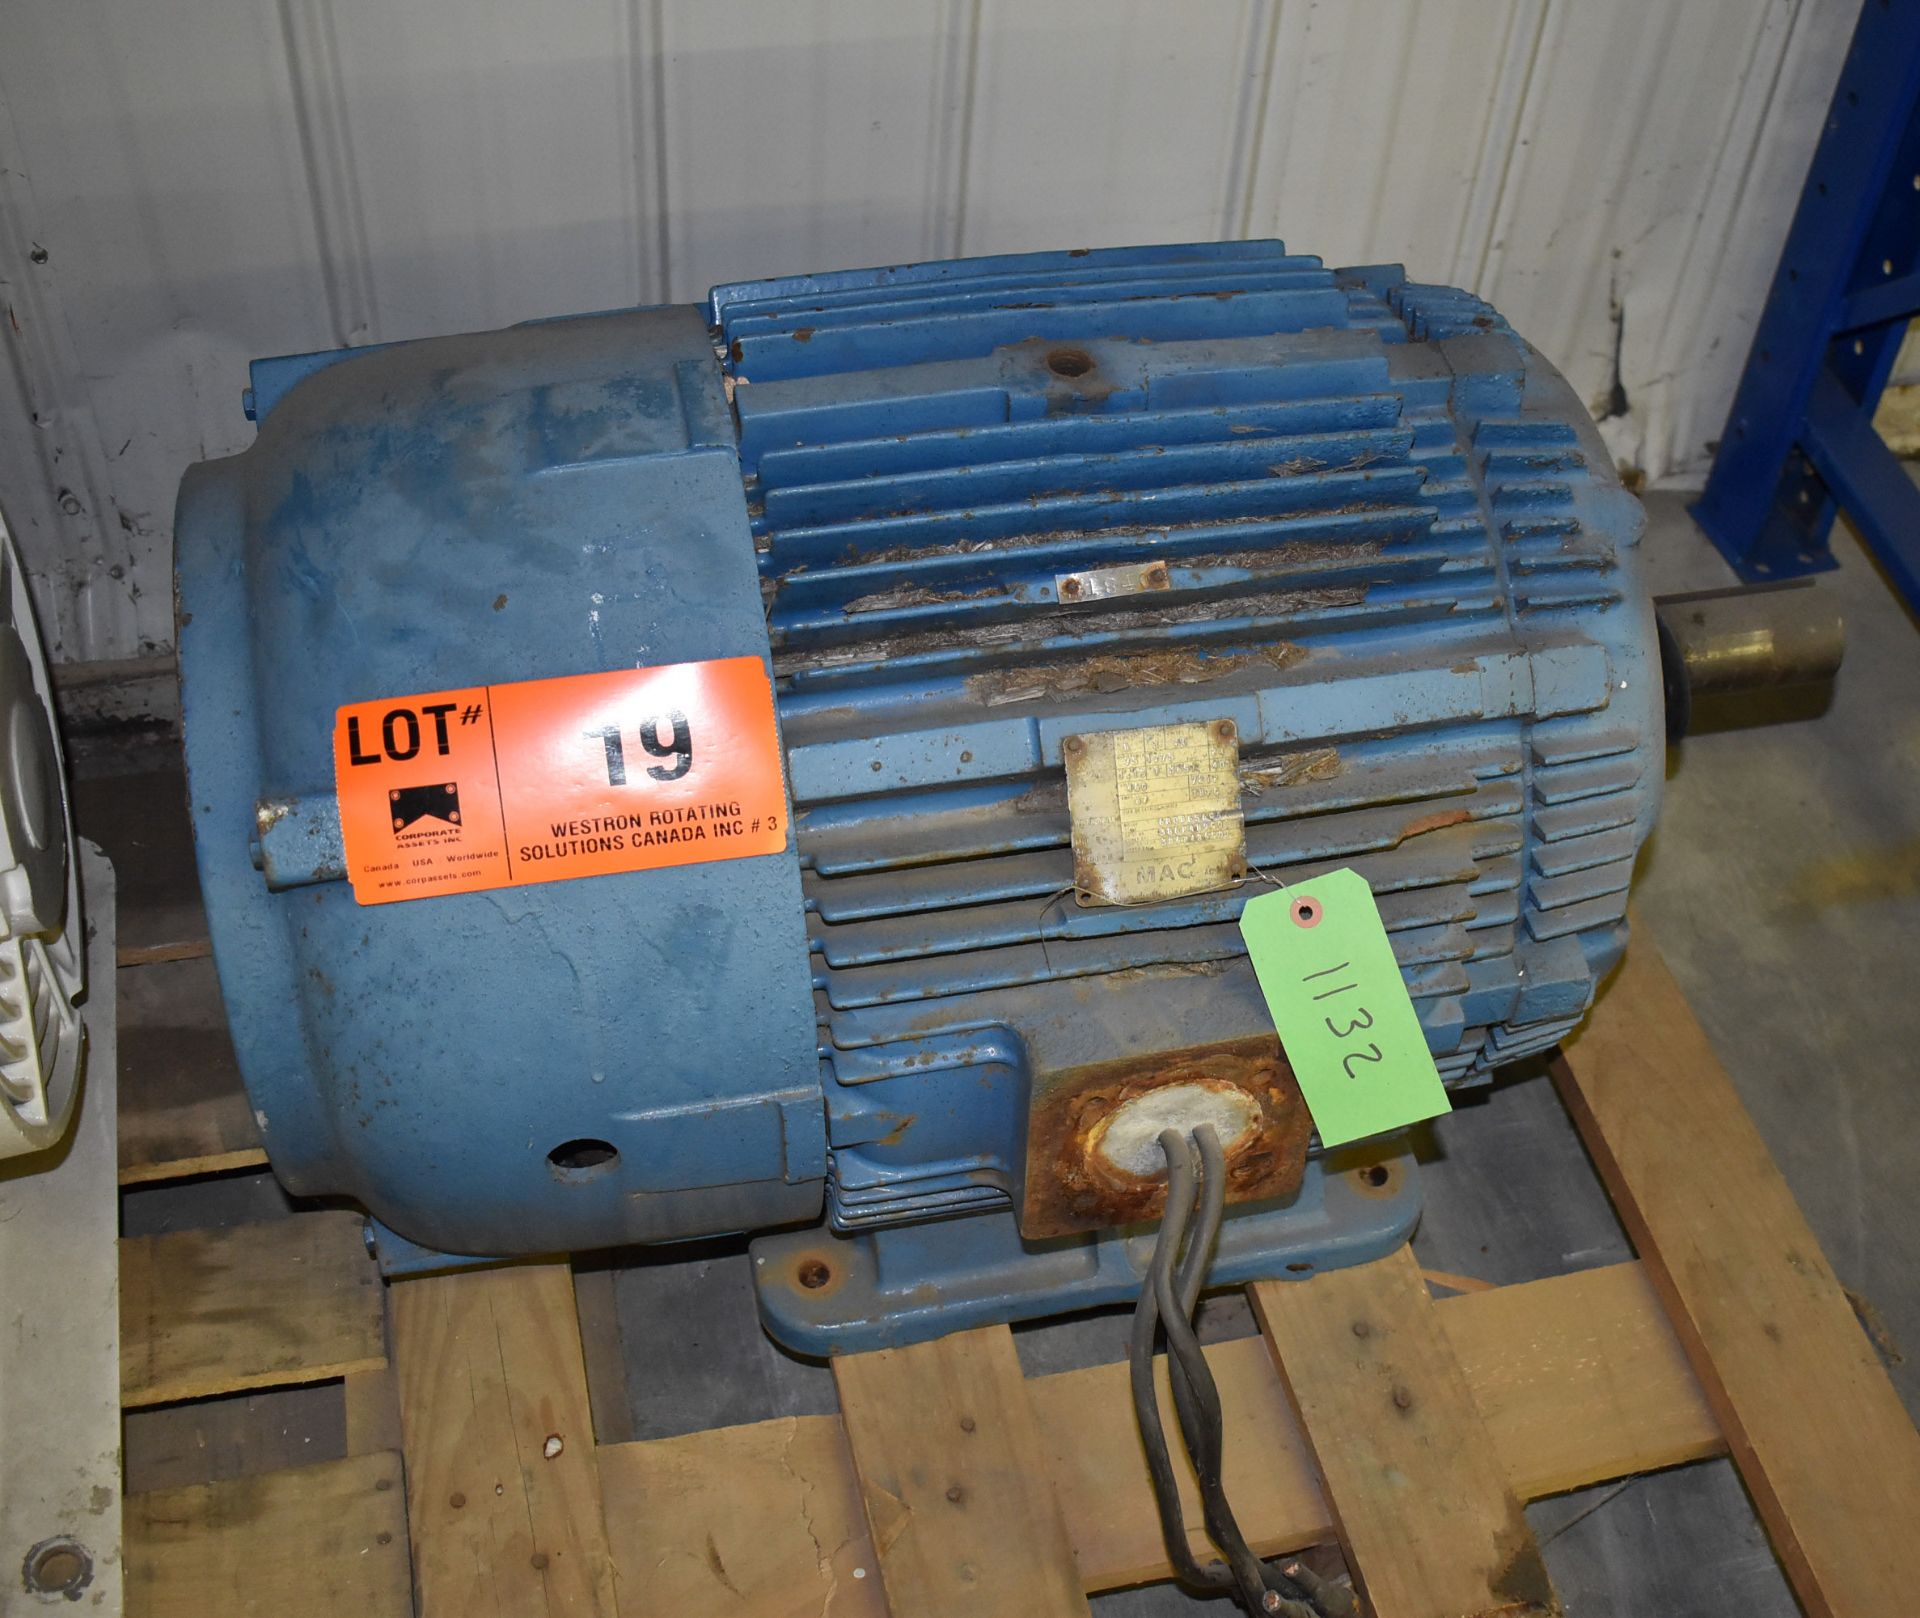 MAC 75 HP ELECTRIC MOTOR WITH 1775 RPM, 460V, 3 PHASE, 60 HZ (CI) [RIGGING FEE FOR LOT #19 - $25 CAD